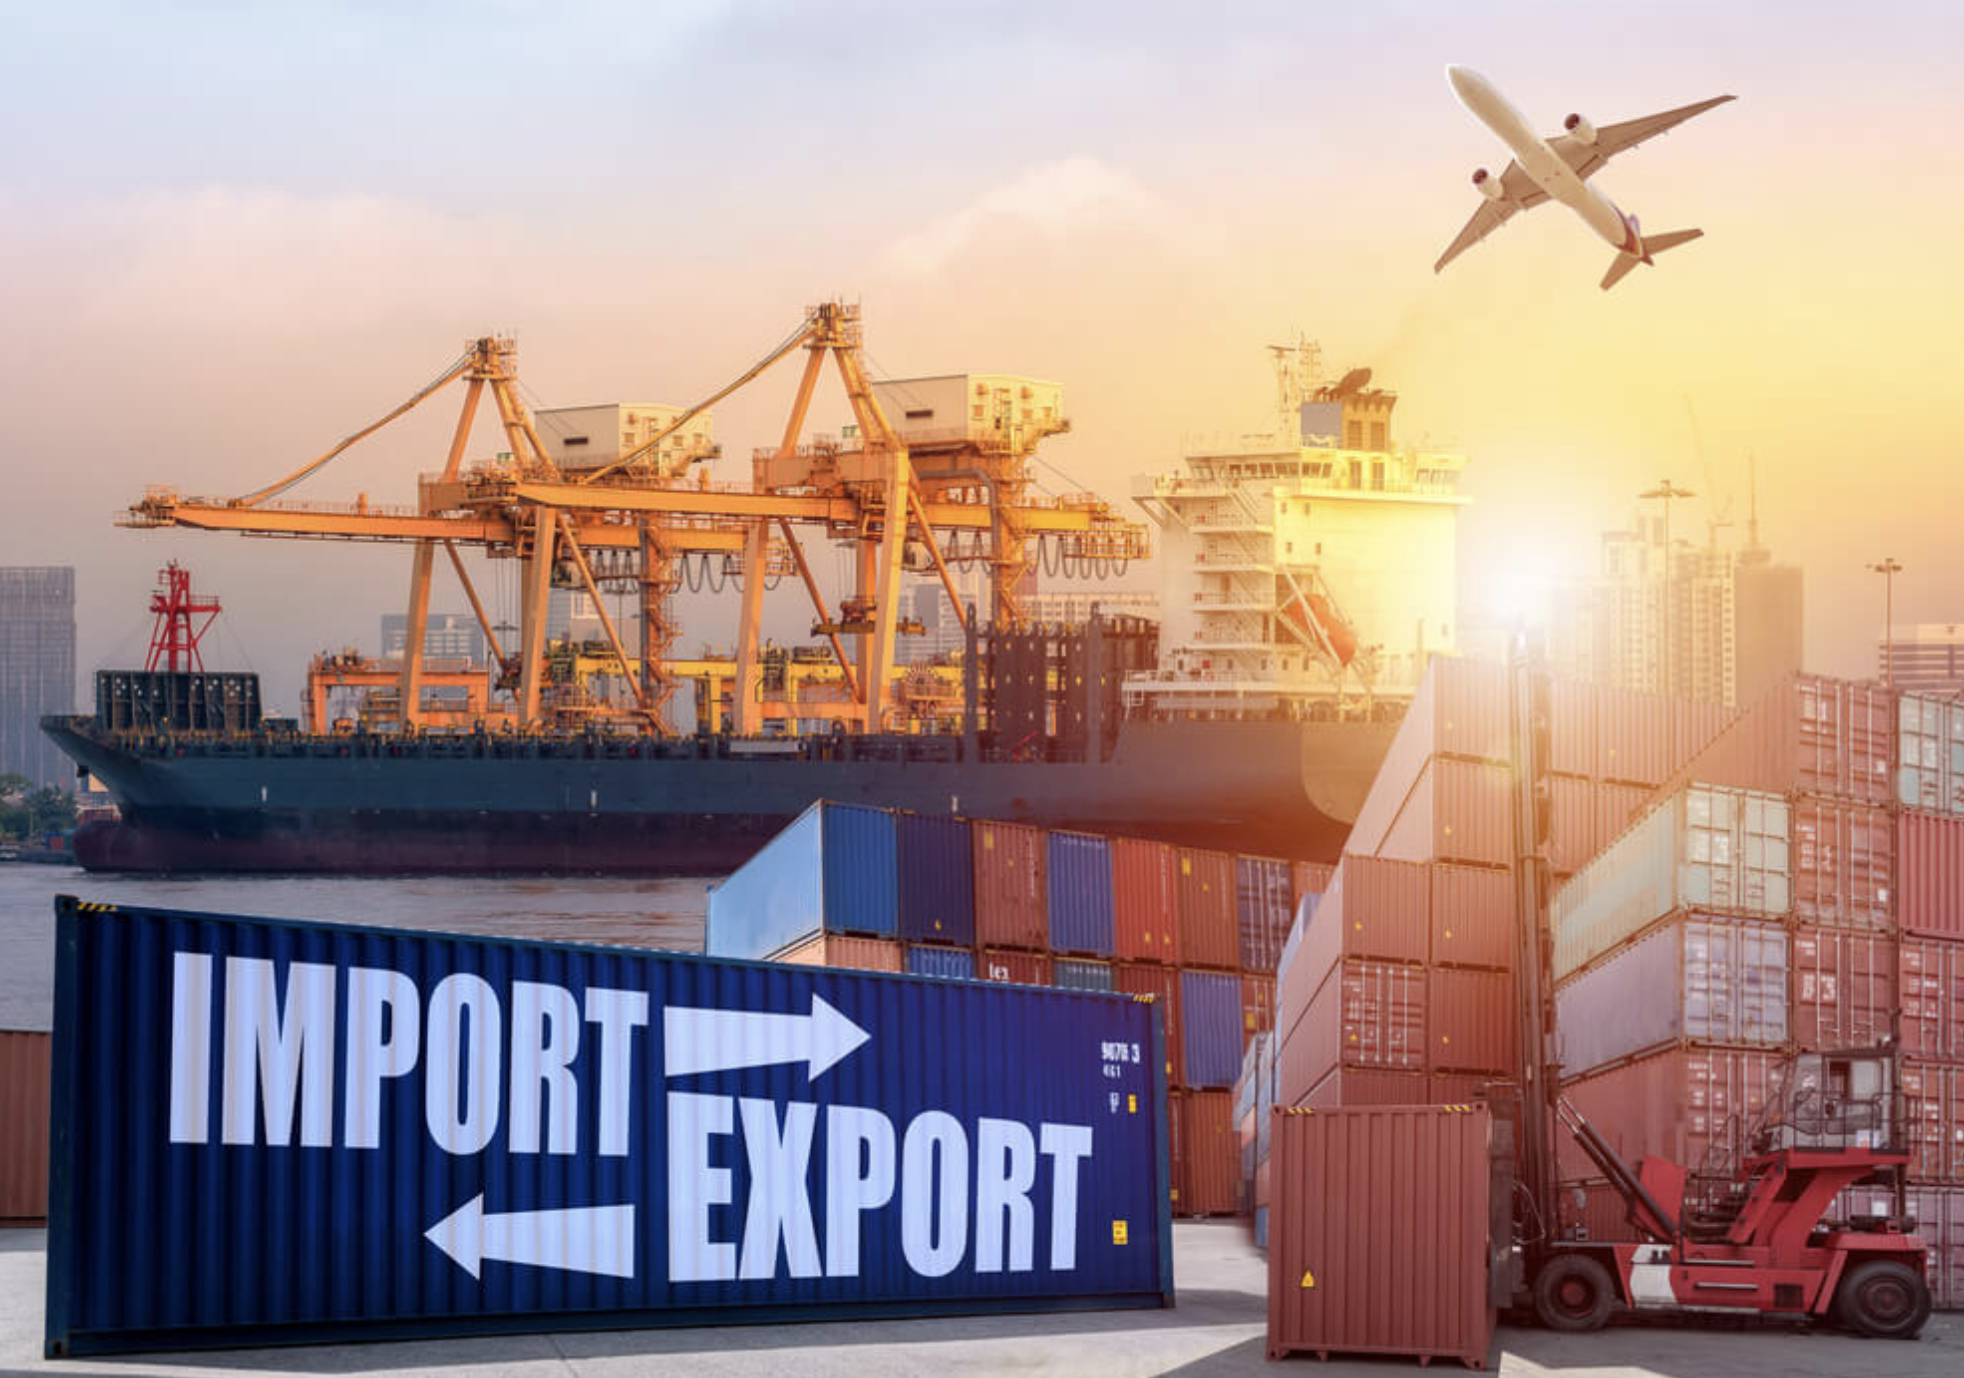 4 Suggestions That Simplify Imports For Your E-Commerce Business In 2023